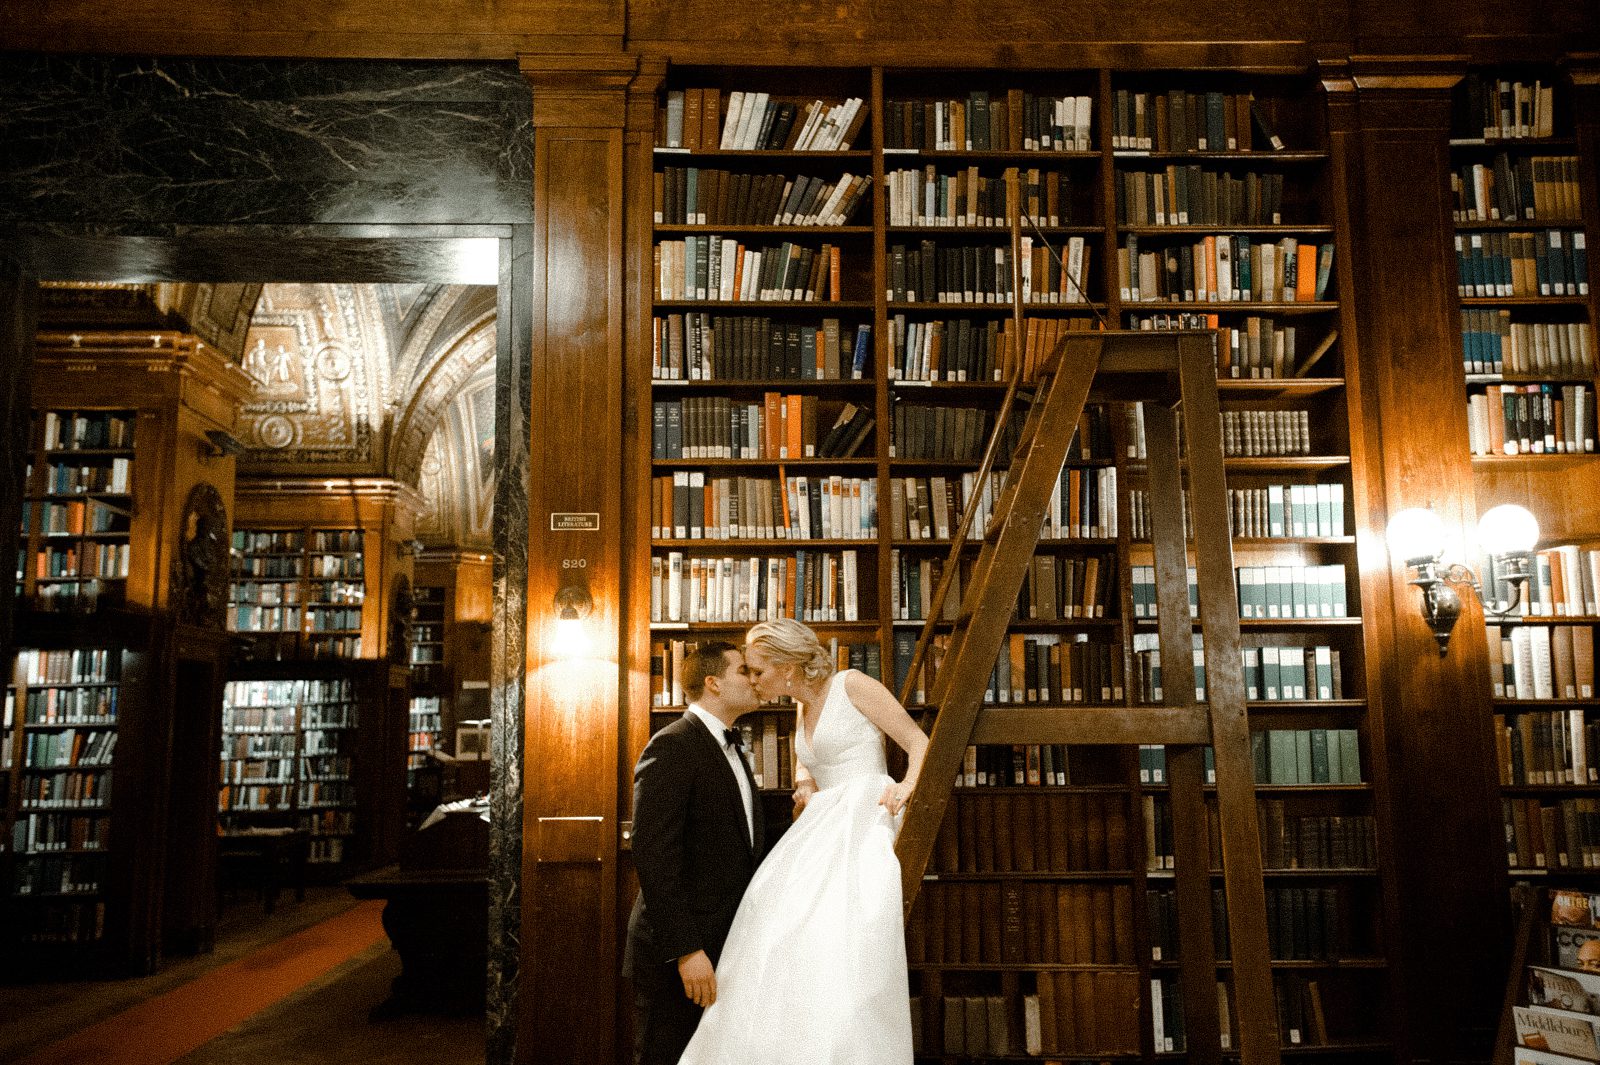 Bride and groom kissing inside a library